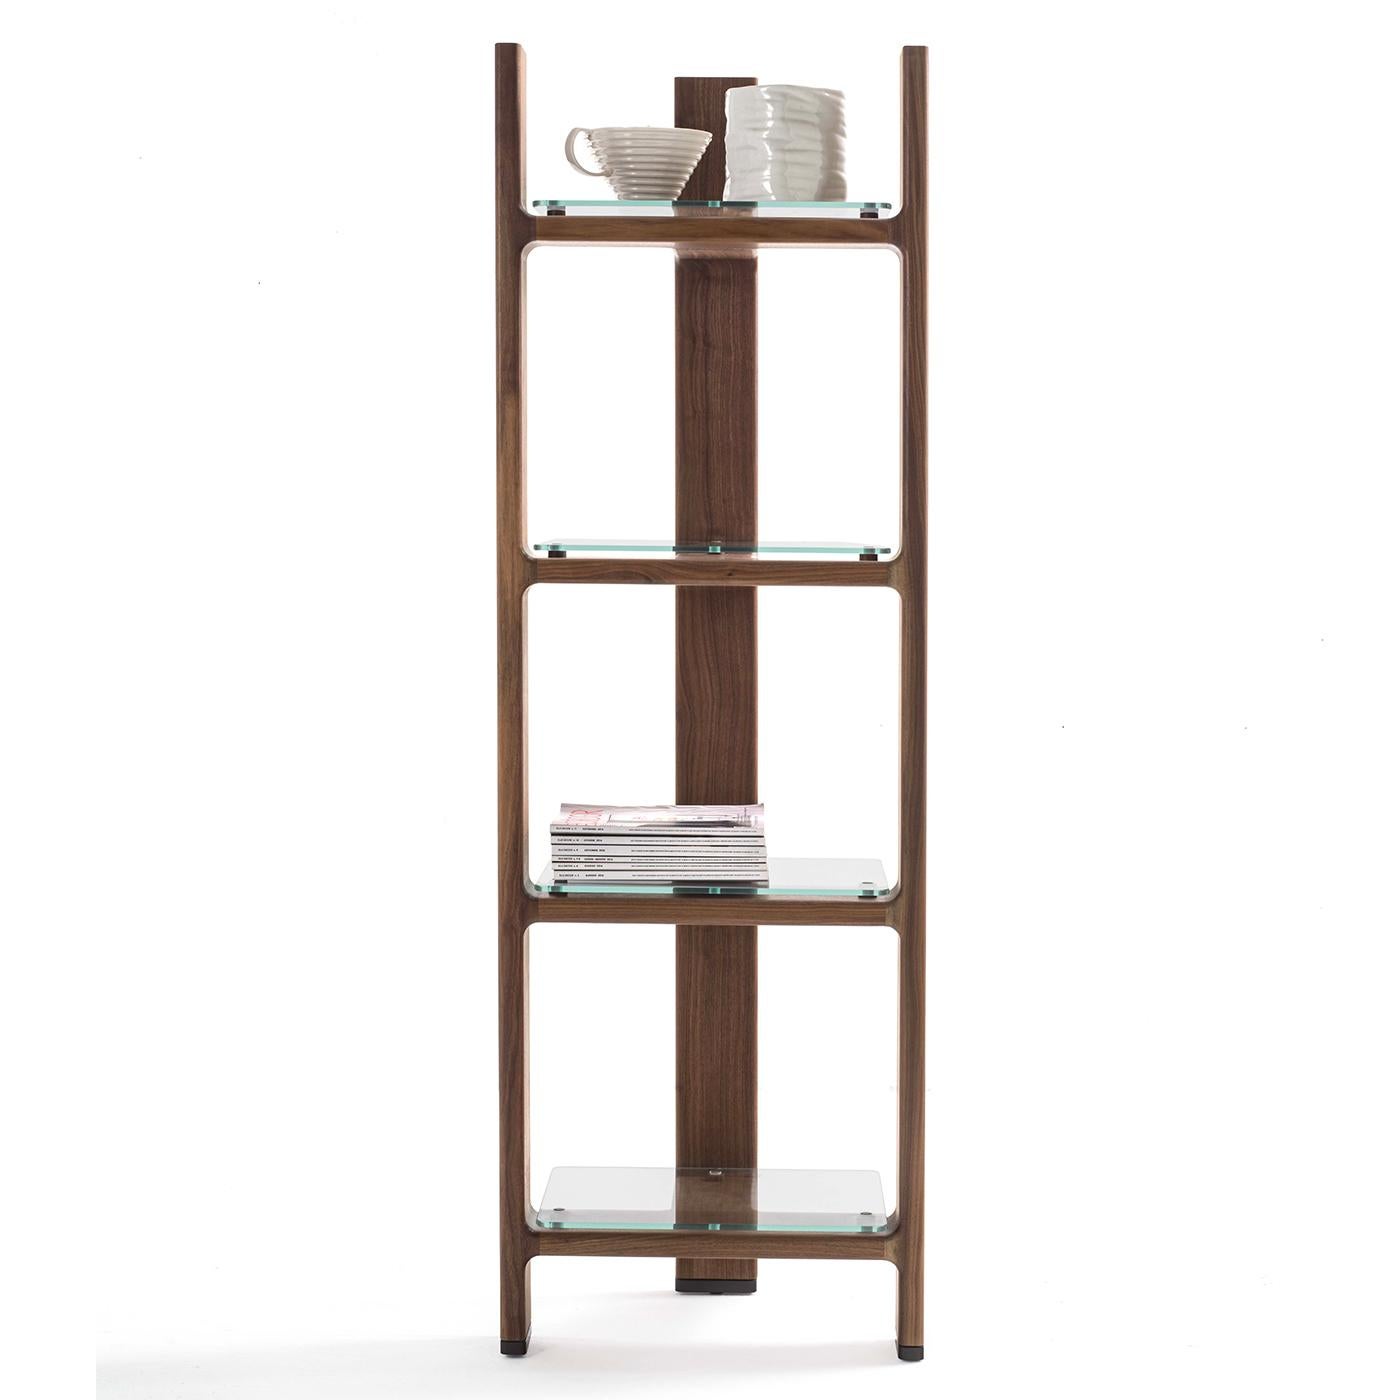 The Tofane shelving unit features a refined and contoured structure of three connected elements, like the famous Dolomite peaks. With clear glass shelves and the frame crafted in solid wood, the unit is an accessory with a distinct character that